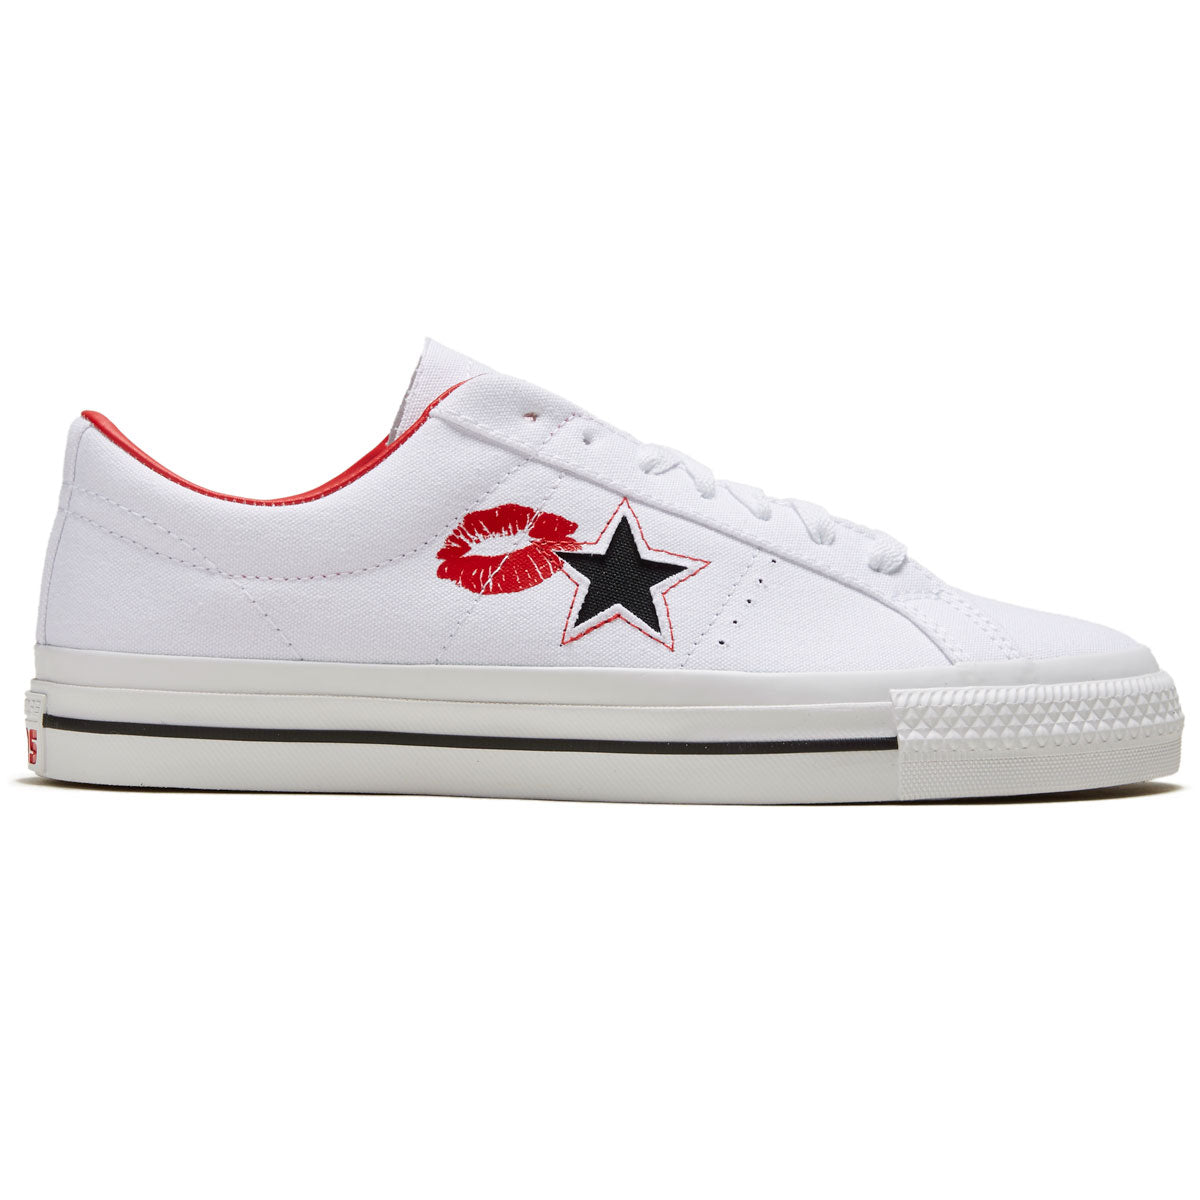 Converse One Star Pro Lips Shoes - White/Black/Red – CCS